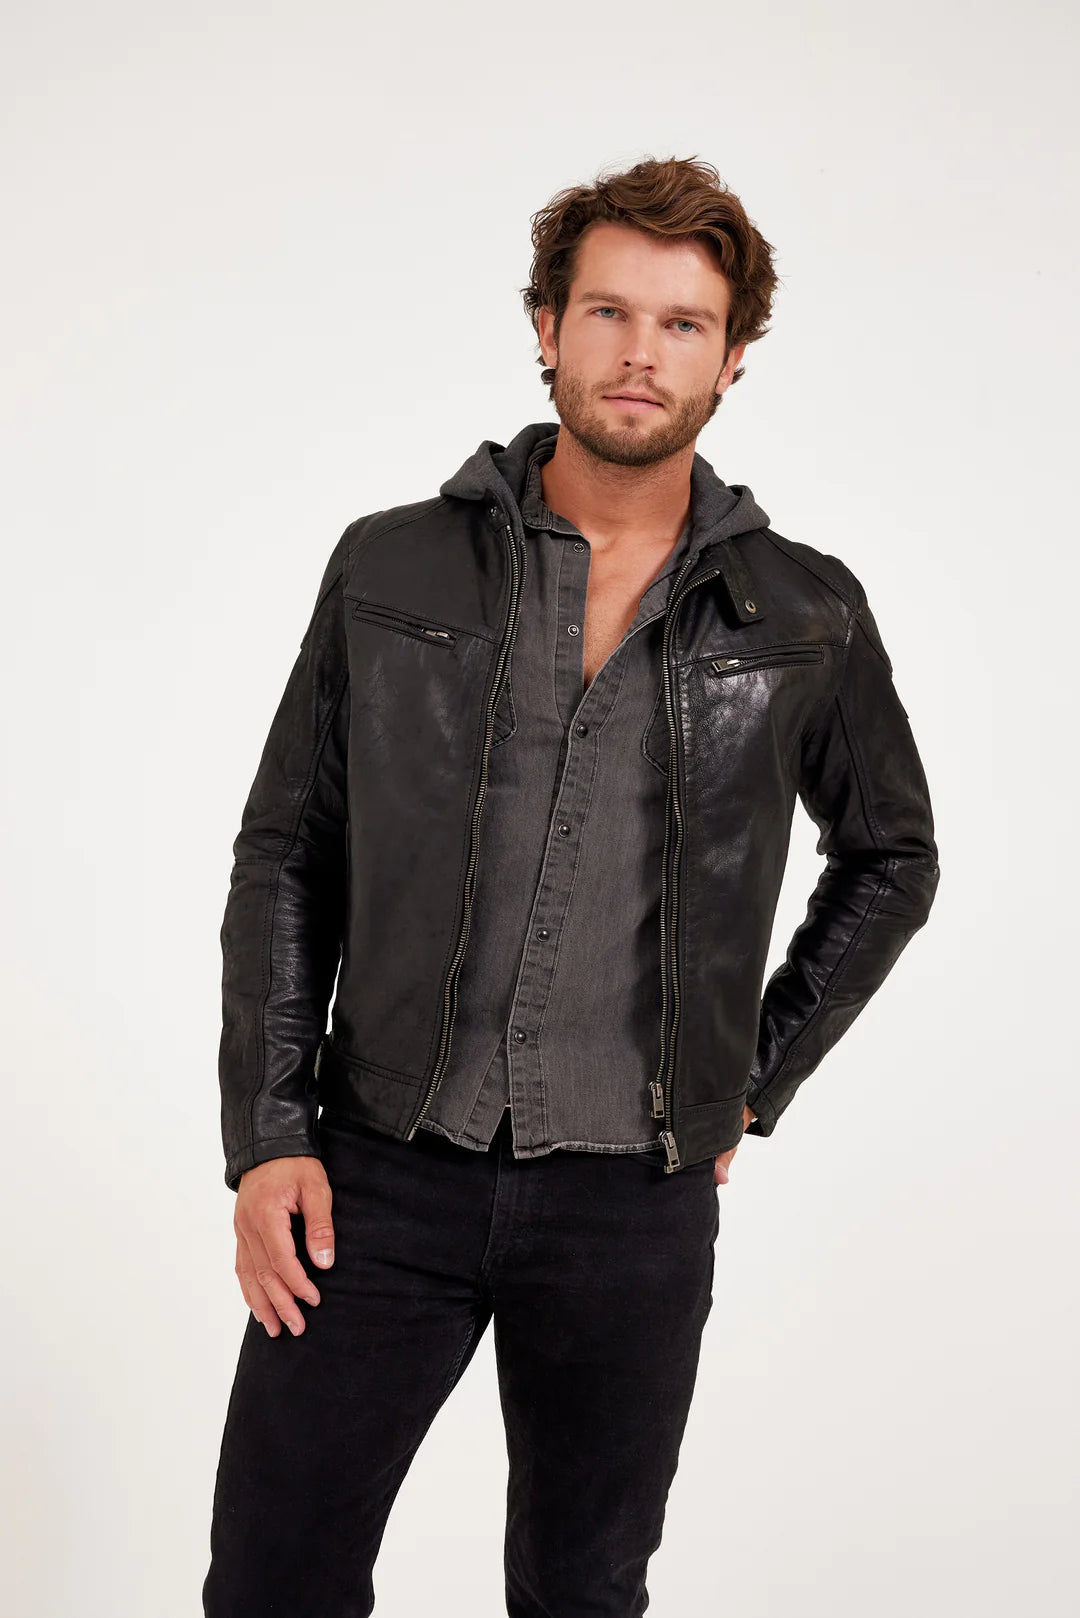 MAURITIUS BLACK LEATHER JACKET WITH ZIPOUT INSERT AND HOOD